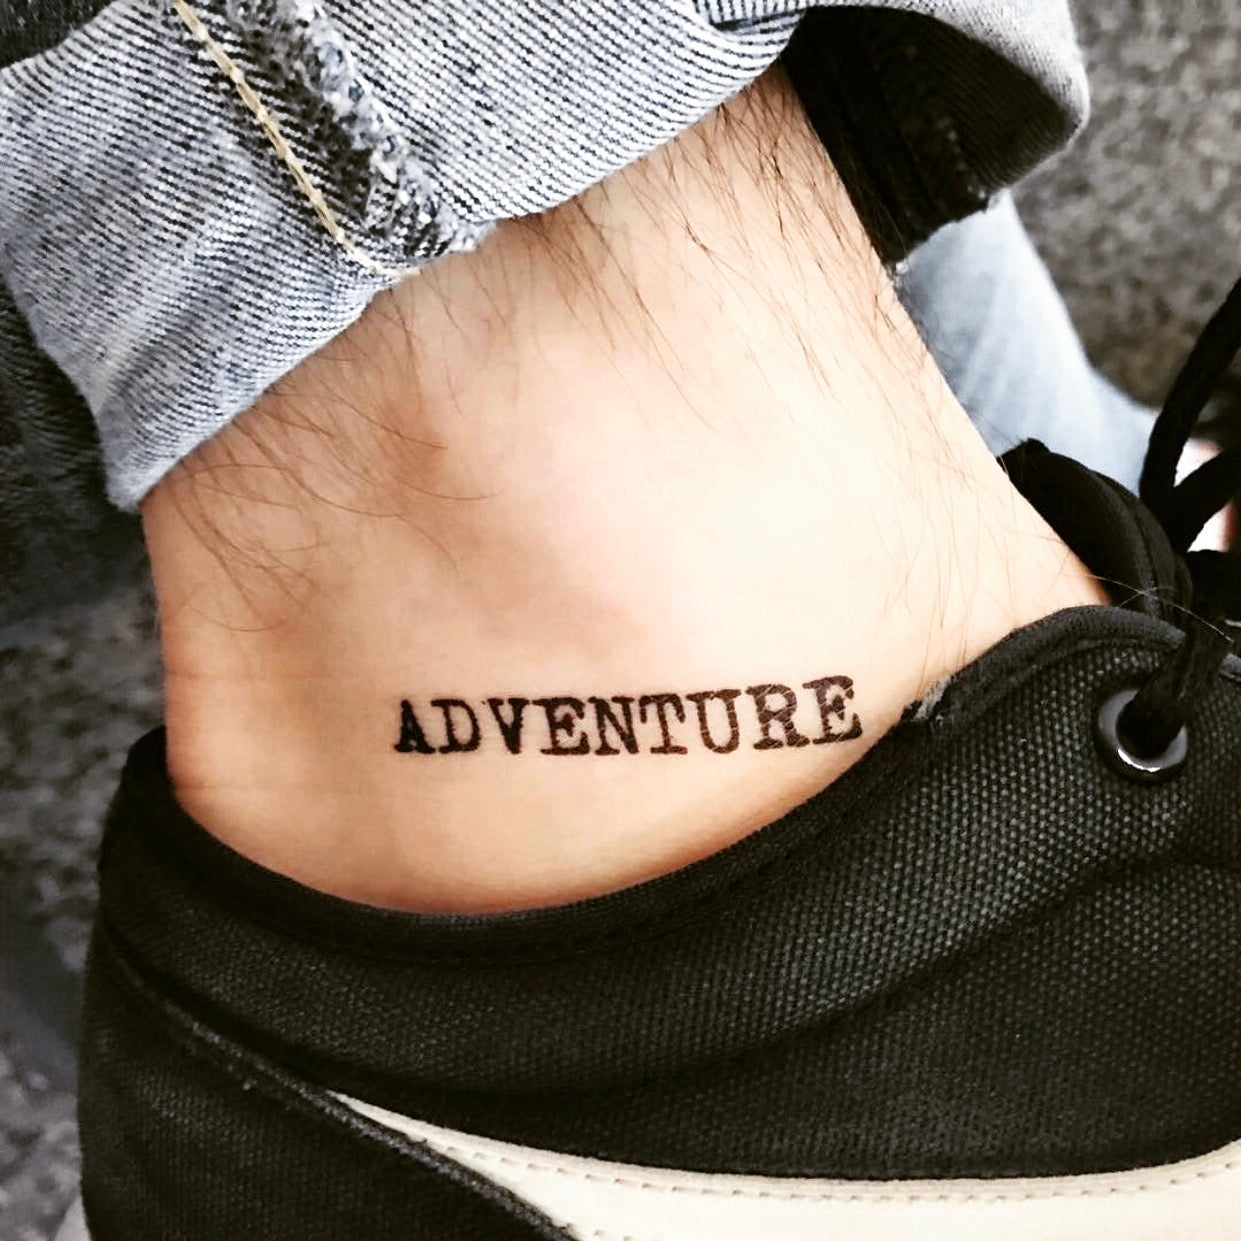 Tattoo tagged with: vasquez, feminist, small, line art, languages, tiny,  ankle, ifttt, little, english, minimalist, english word, word, other, fine  line, fearless | inked-app.com